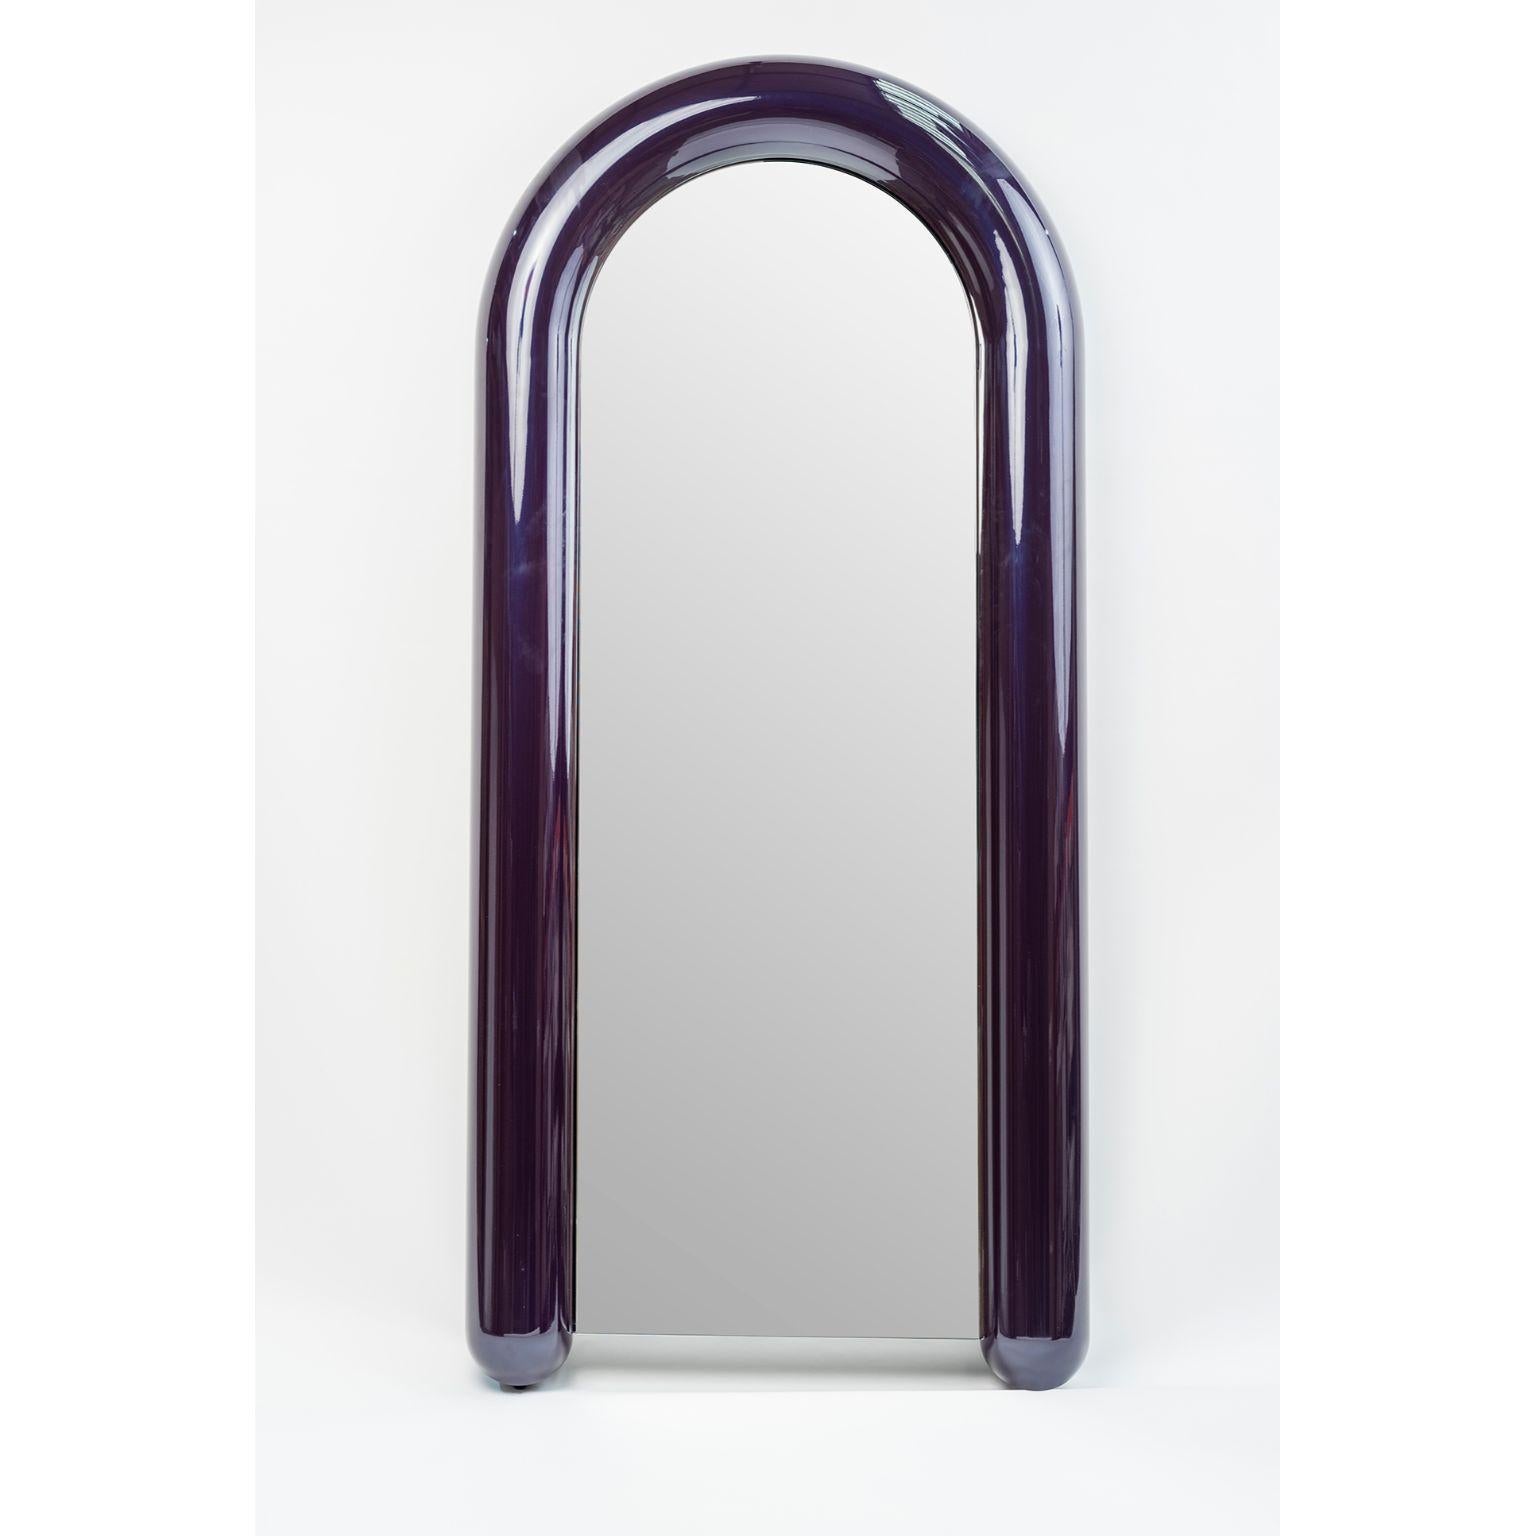 Soufflé mirror by Luca Nichetto.
Materials: structure: menthol / coral / prune 
 liquid-painted metal, mirror.
Dimensions: W 91.5 x D 16 x H 200.5 cm.



With a playful design and an inflated appearance, Soufflé mirror borrows the French